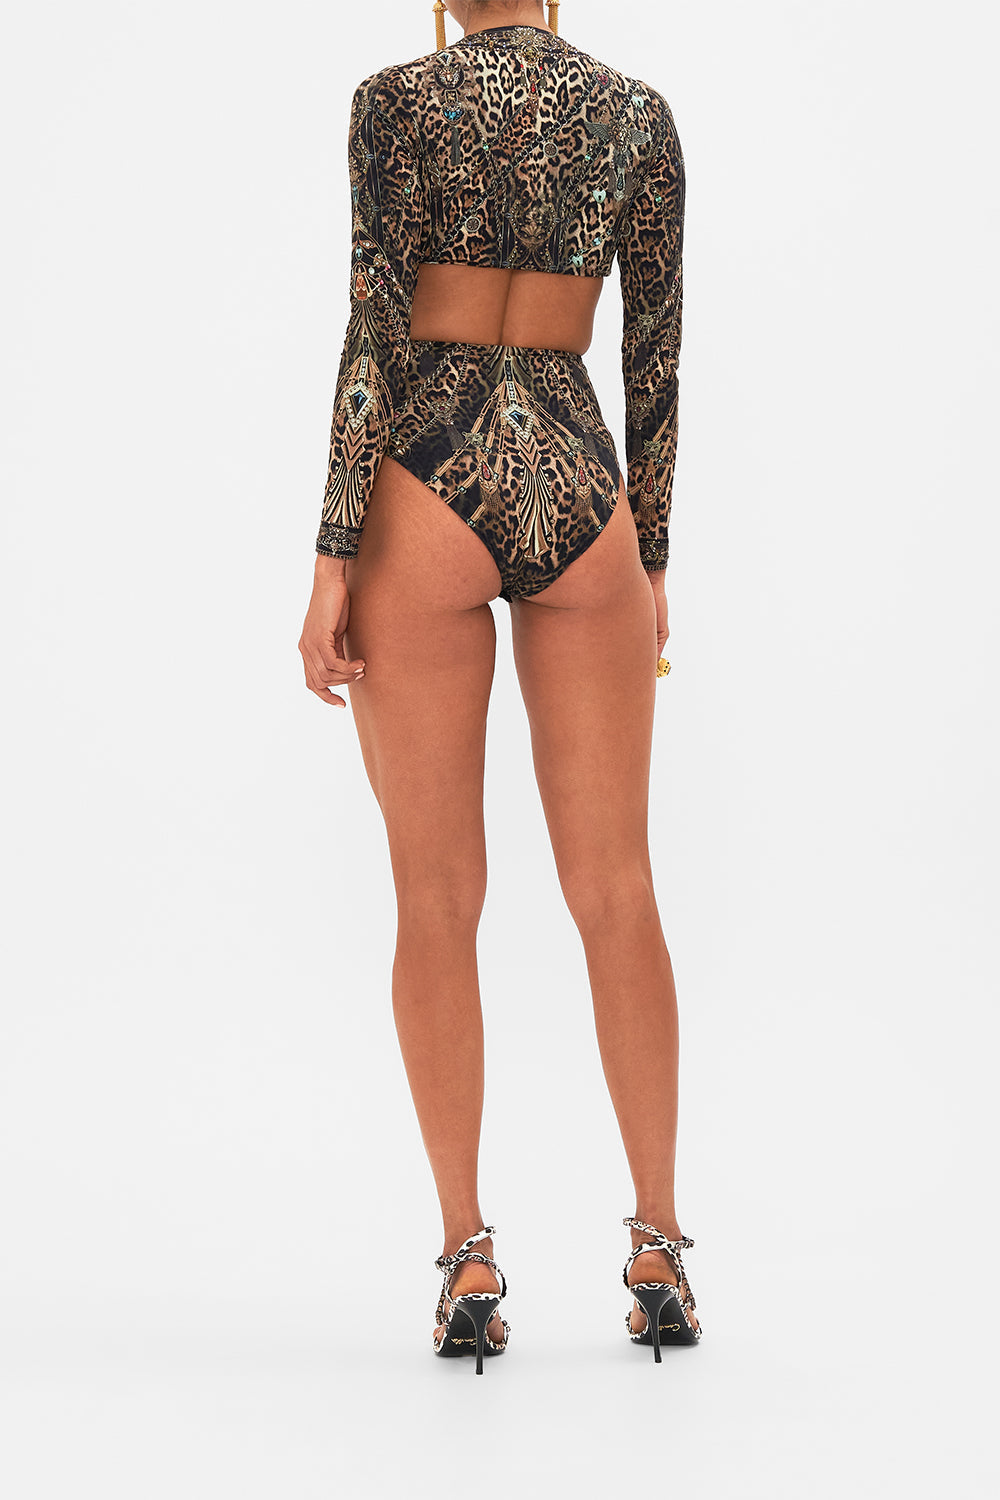 CAMILLA leopard cut-out bodysuit with trim in Amsterglam